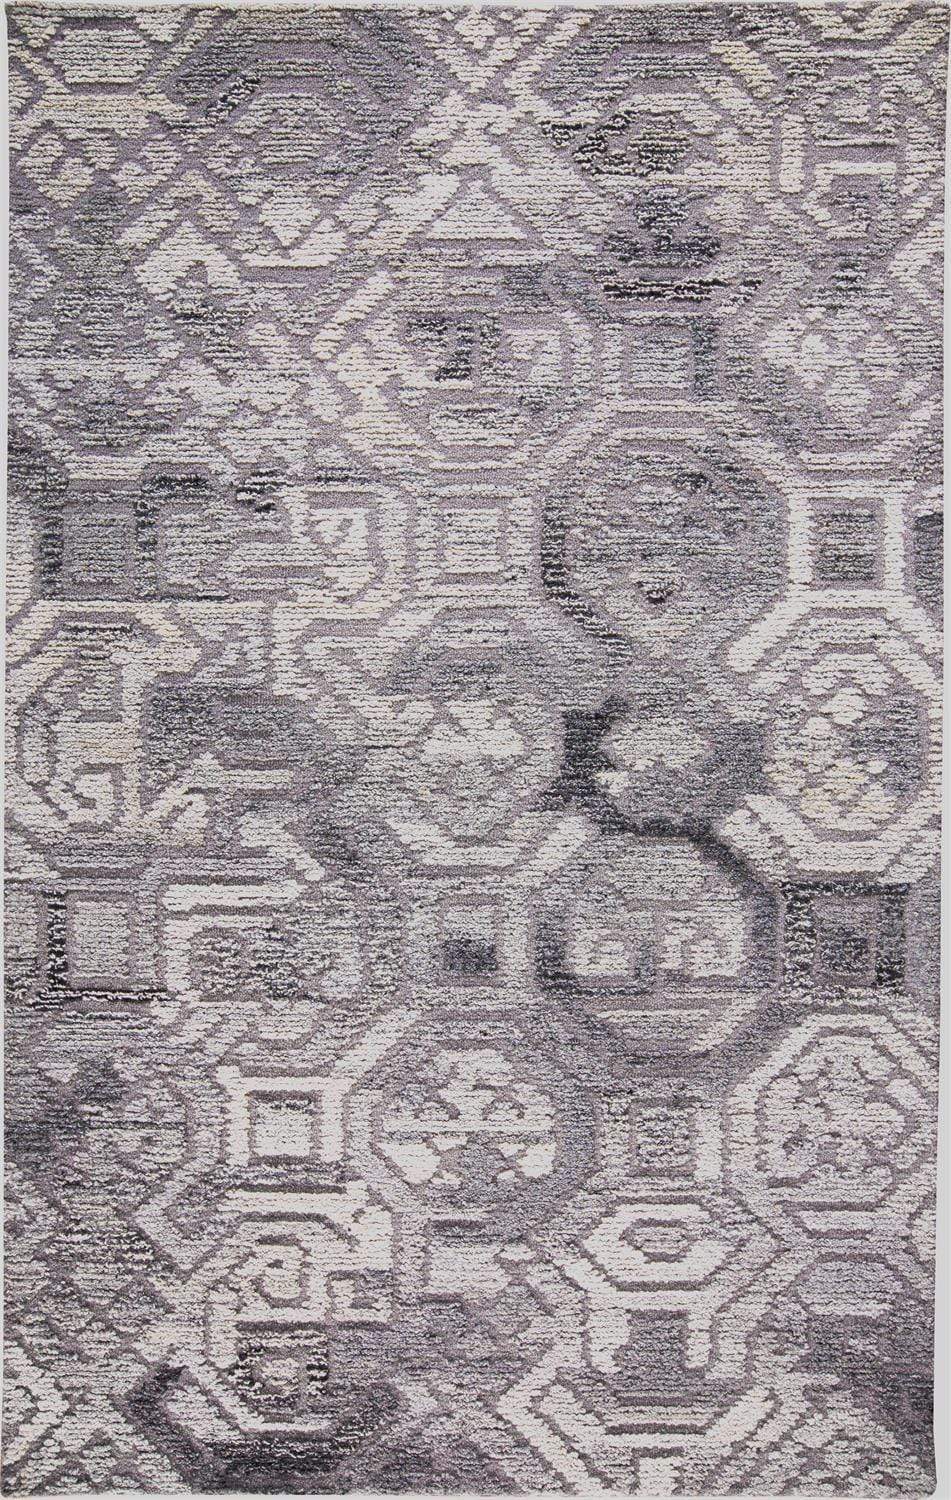 Feizy Feizy Asher Lustrous Tufted Wool Rug - Light & Dark Gray - Available in 9 Sizes 3'-6" x 5'-6" 8638772FMGY000C50